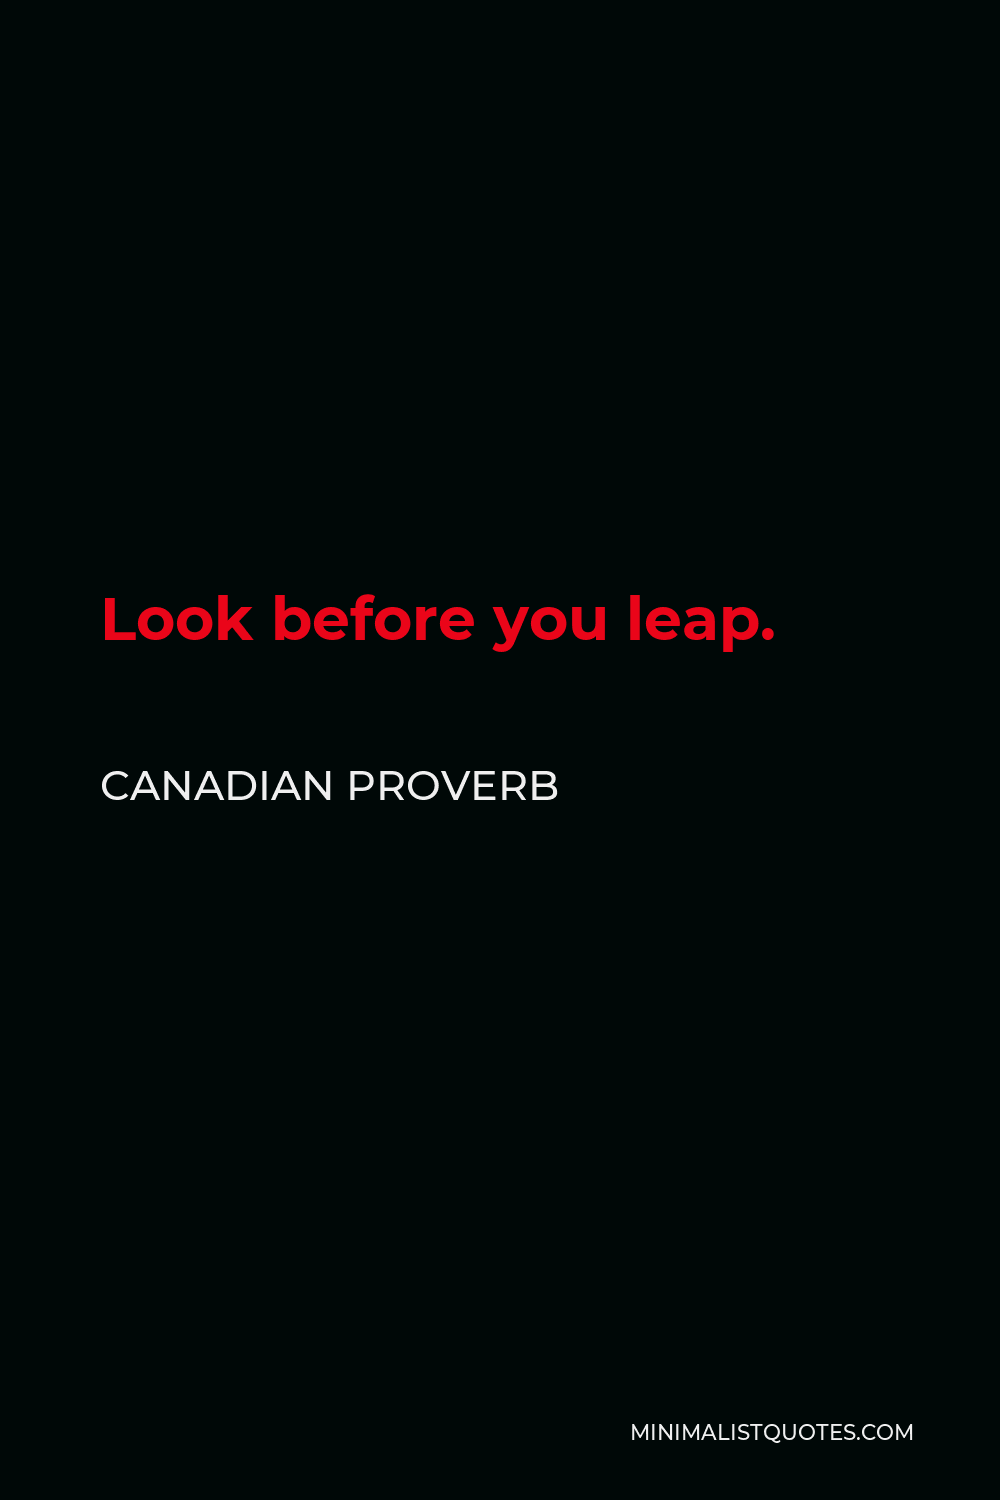 Canadian Proverb Quote - Look before you leap.